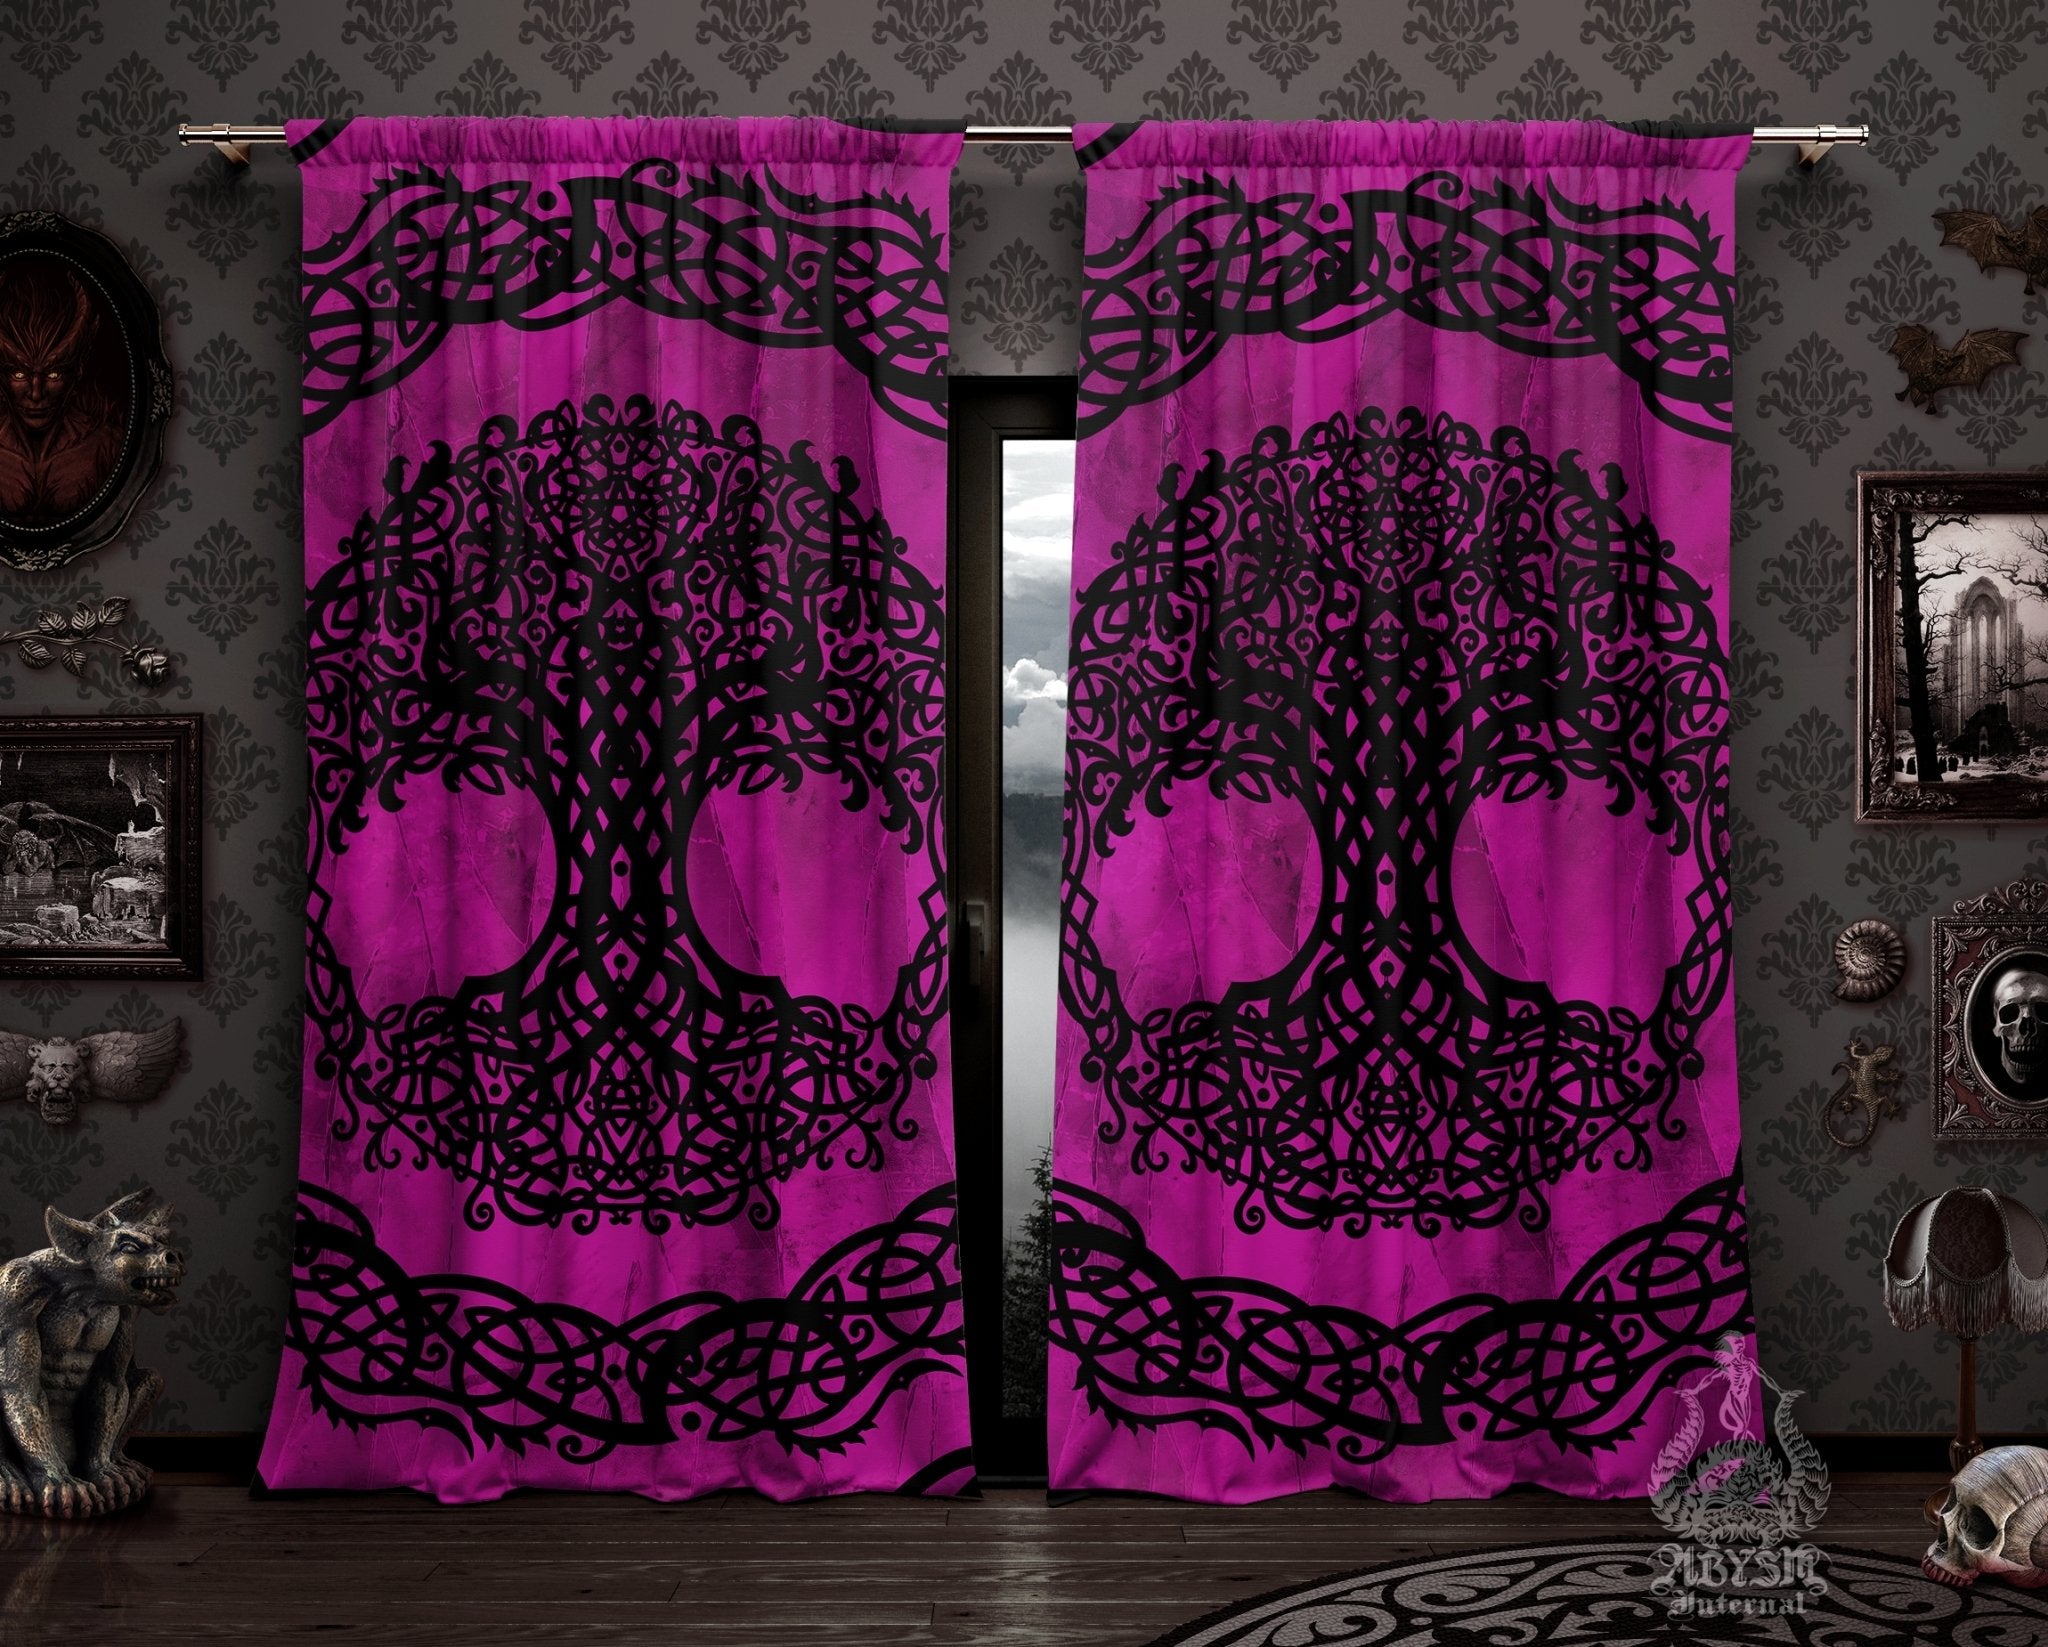 Witchy Blackout Curtains, Long Window Panels, Tree of Life, Celtic Knot, Pagan Room Decor, Wiccan Art Print, Witch Home Decor - Pink and Black - Abysm Internal